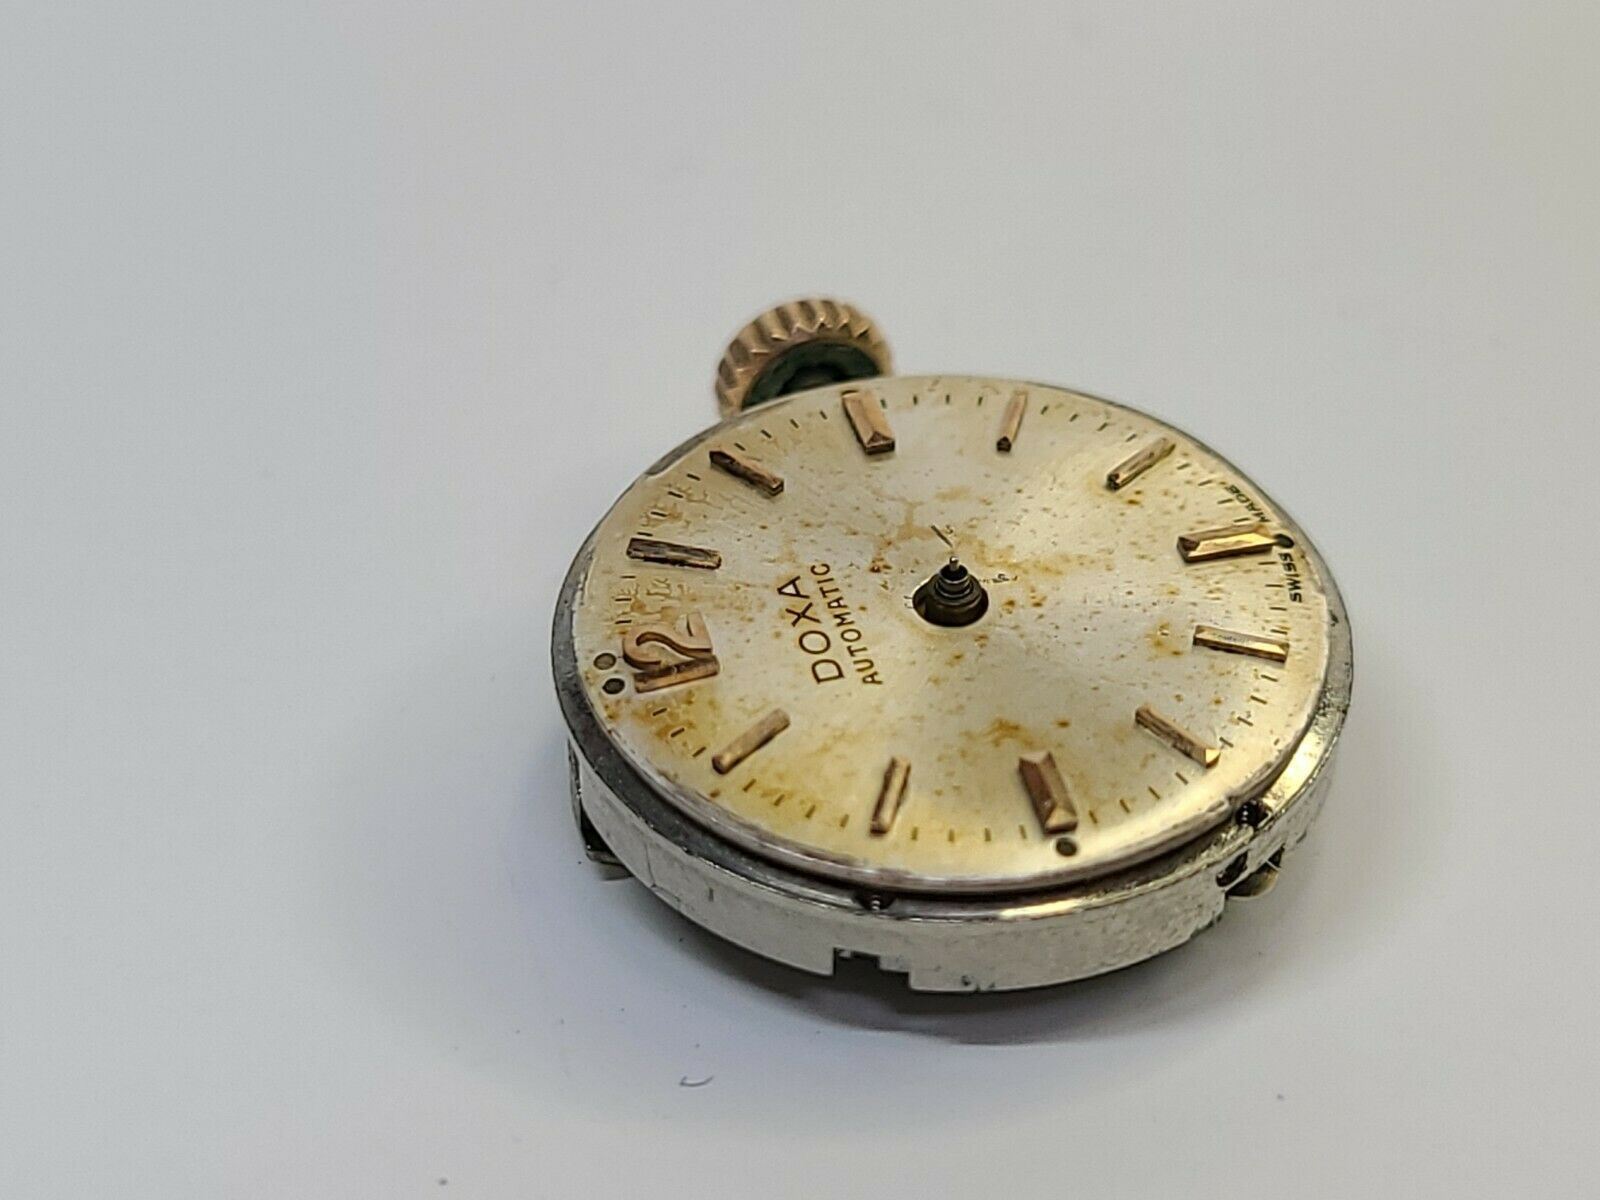 Doxa Automatic Caliber 105 7 1/4 Watch Movement with dial